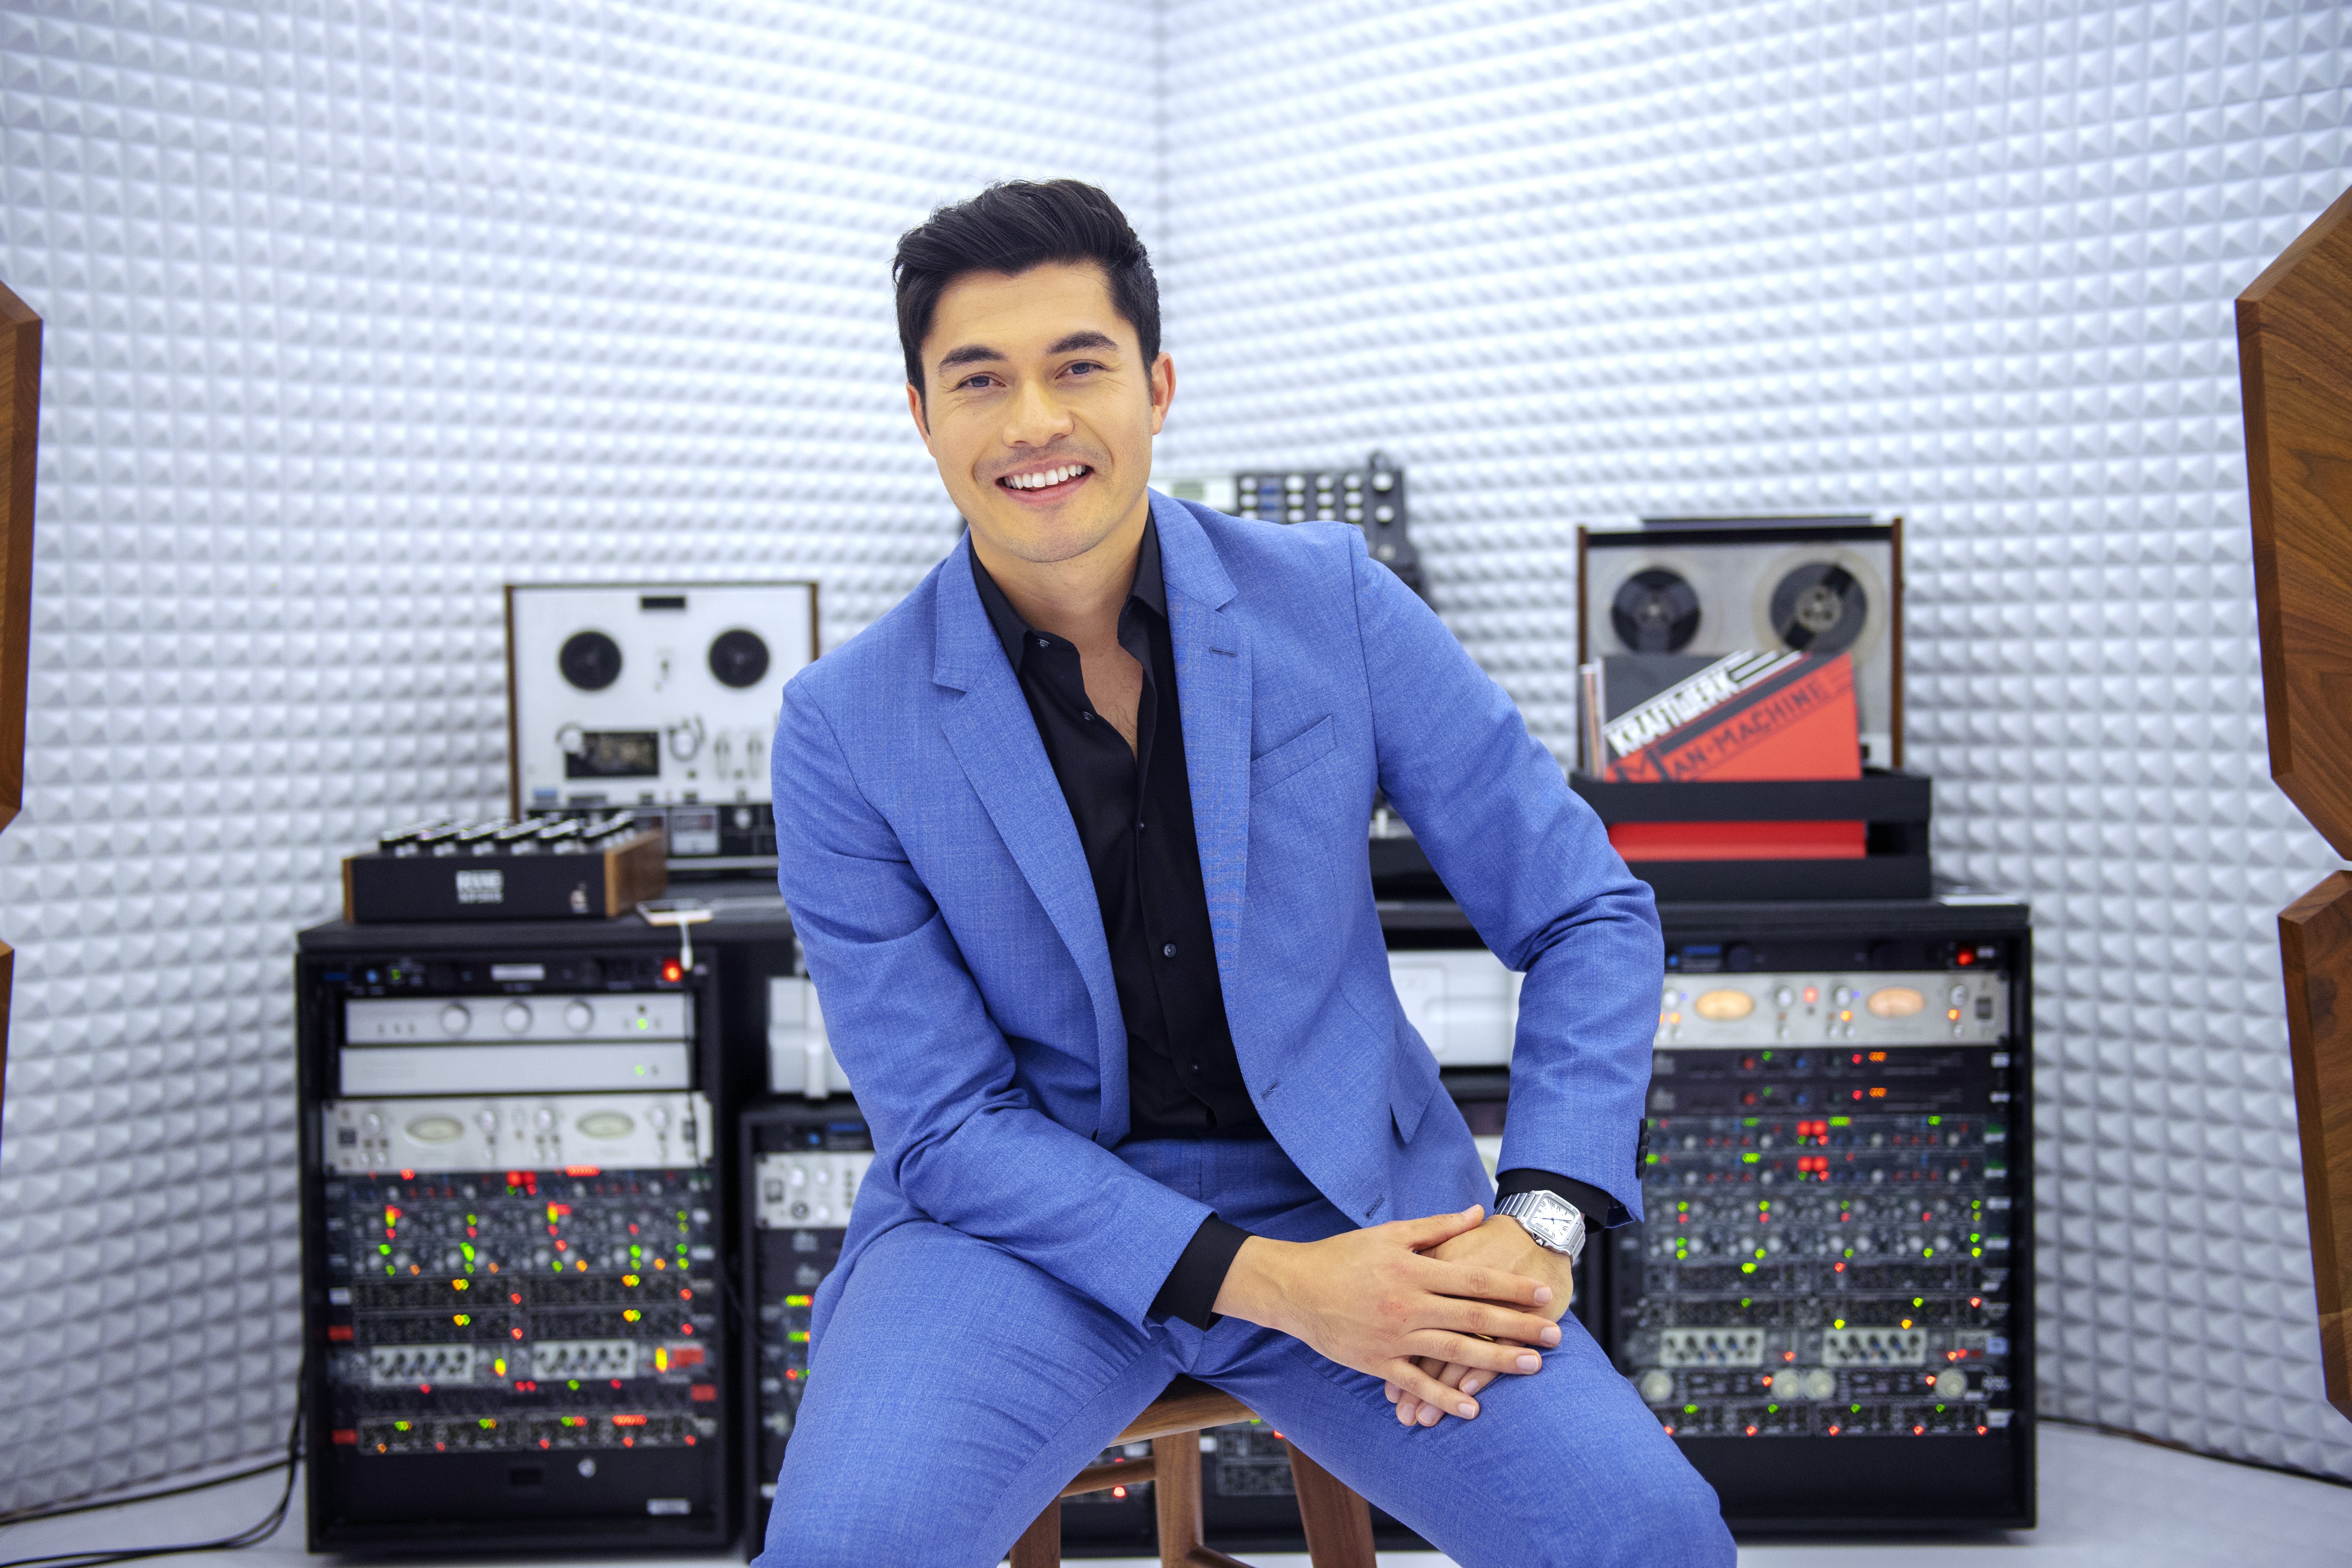 Crazy Rich Asians Henry Golding on the insanity of fame not being Asian  enough and tribal tattoos  South China Morning Post